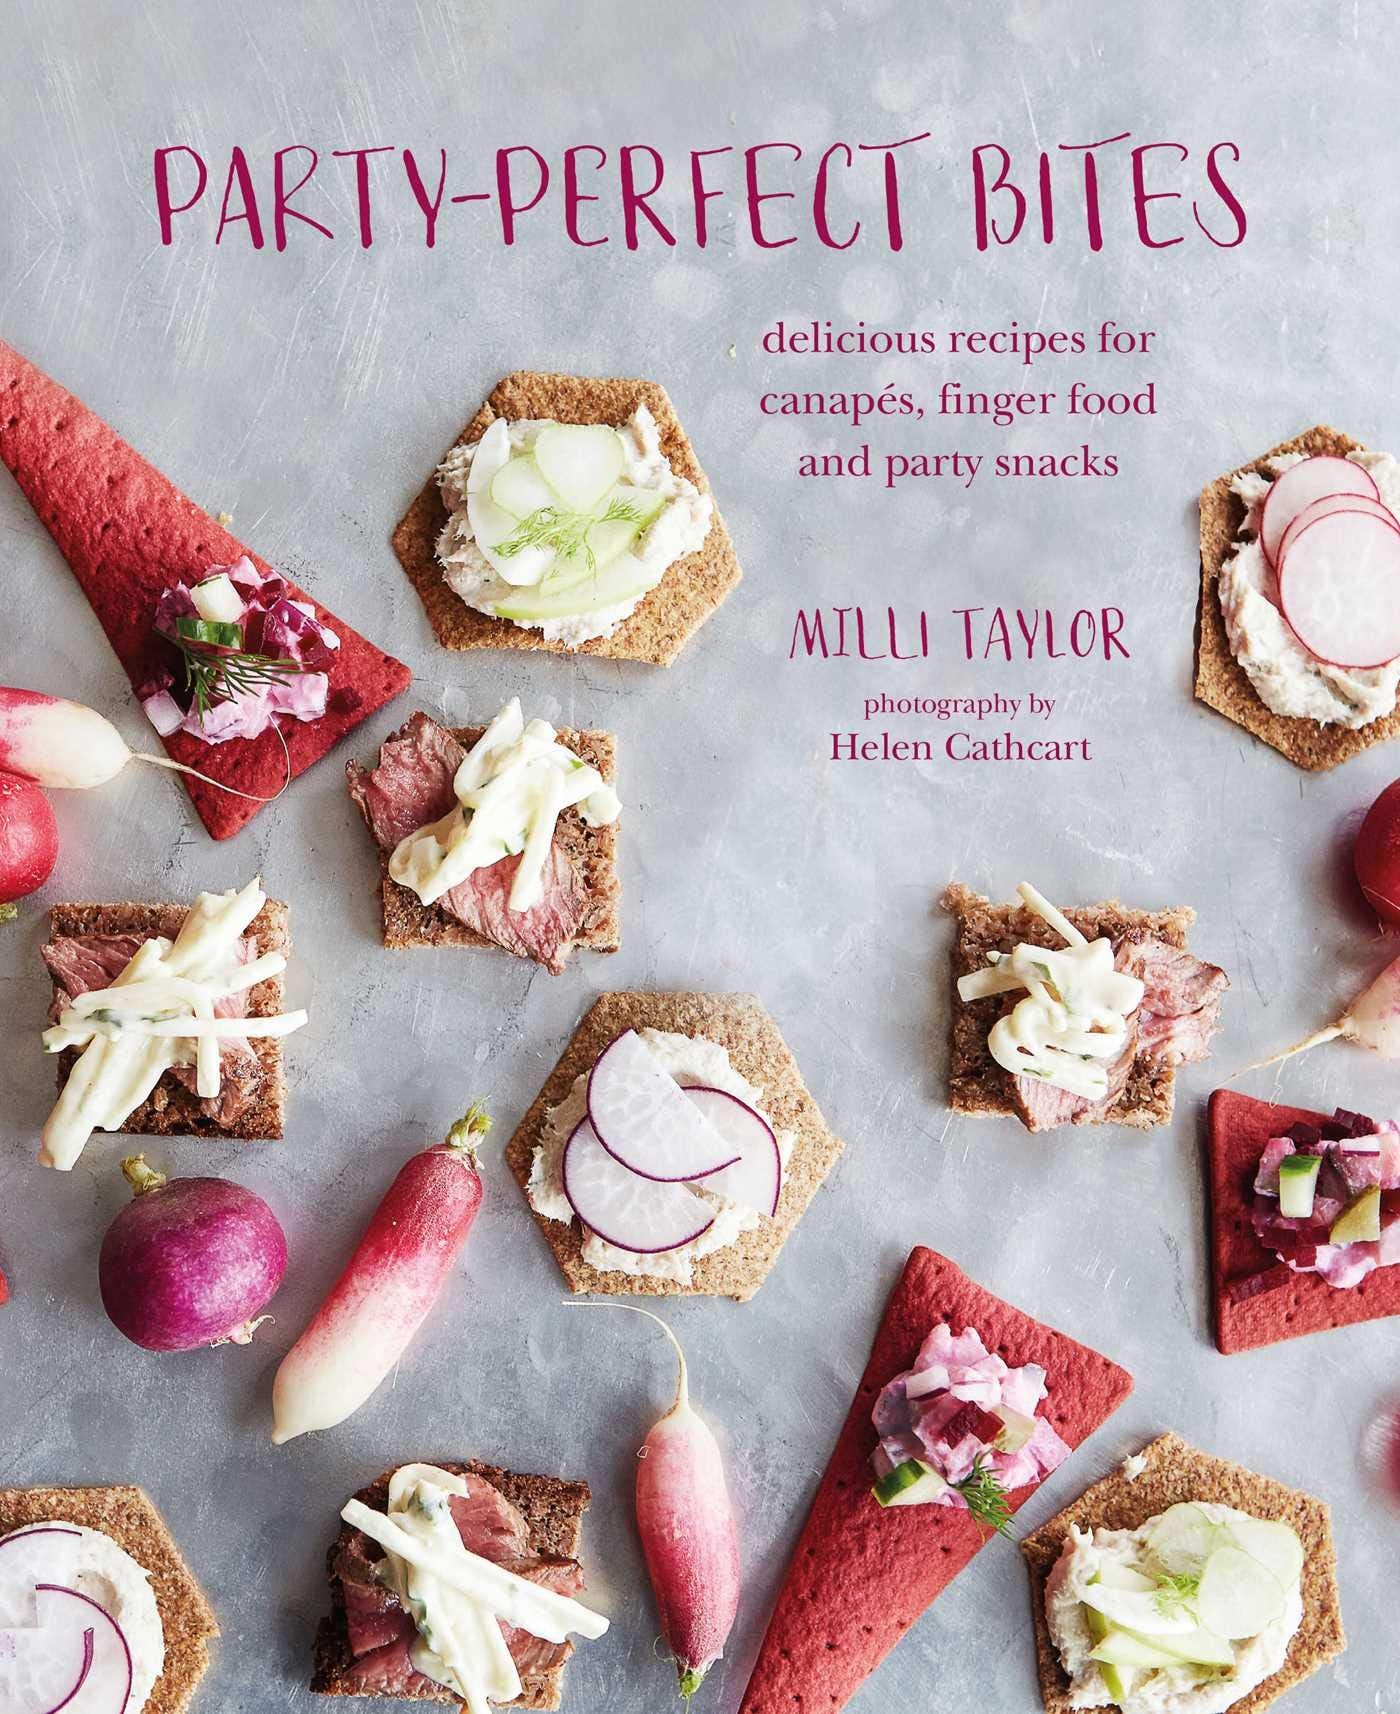 Party-Perfect Bites by Milli Taylor